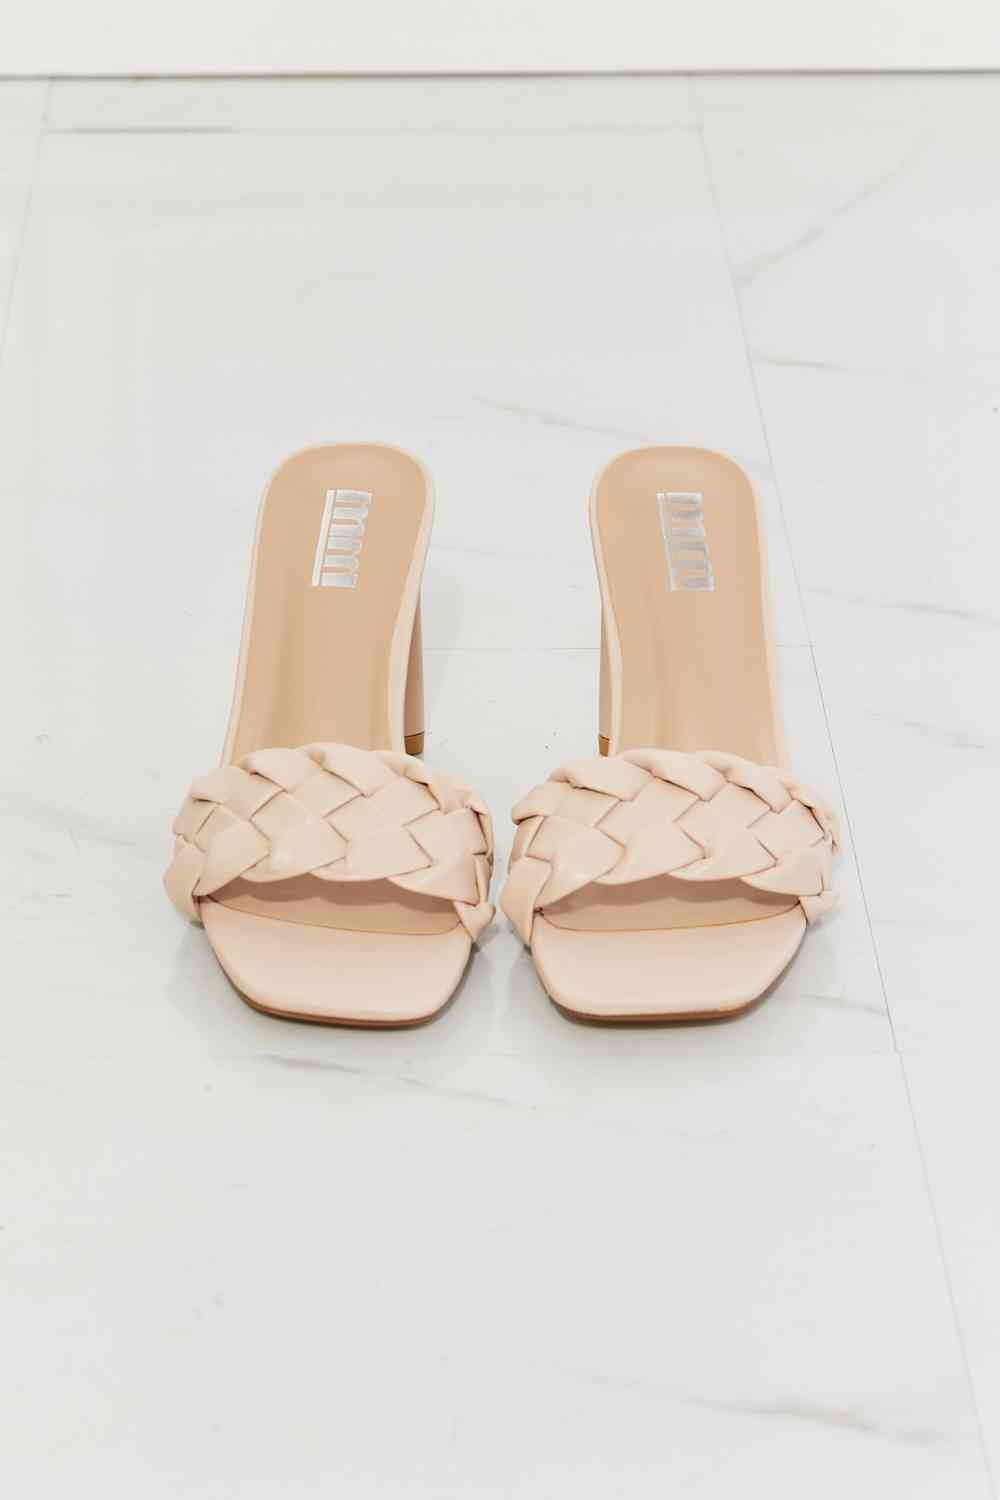 MMShoes Top of the World Braided Block Heel Sandals in Beige - Guy Christopher